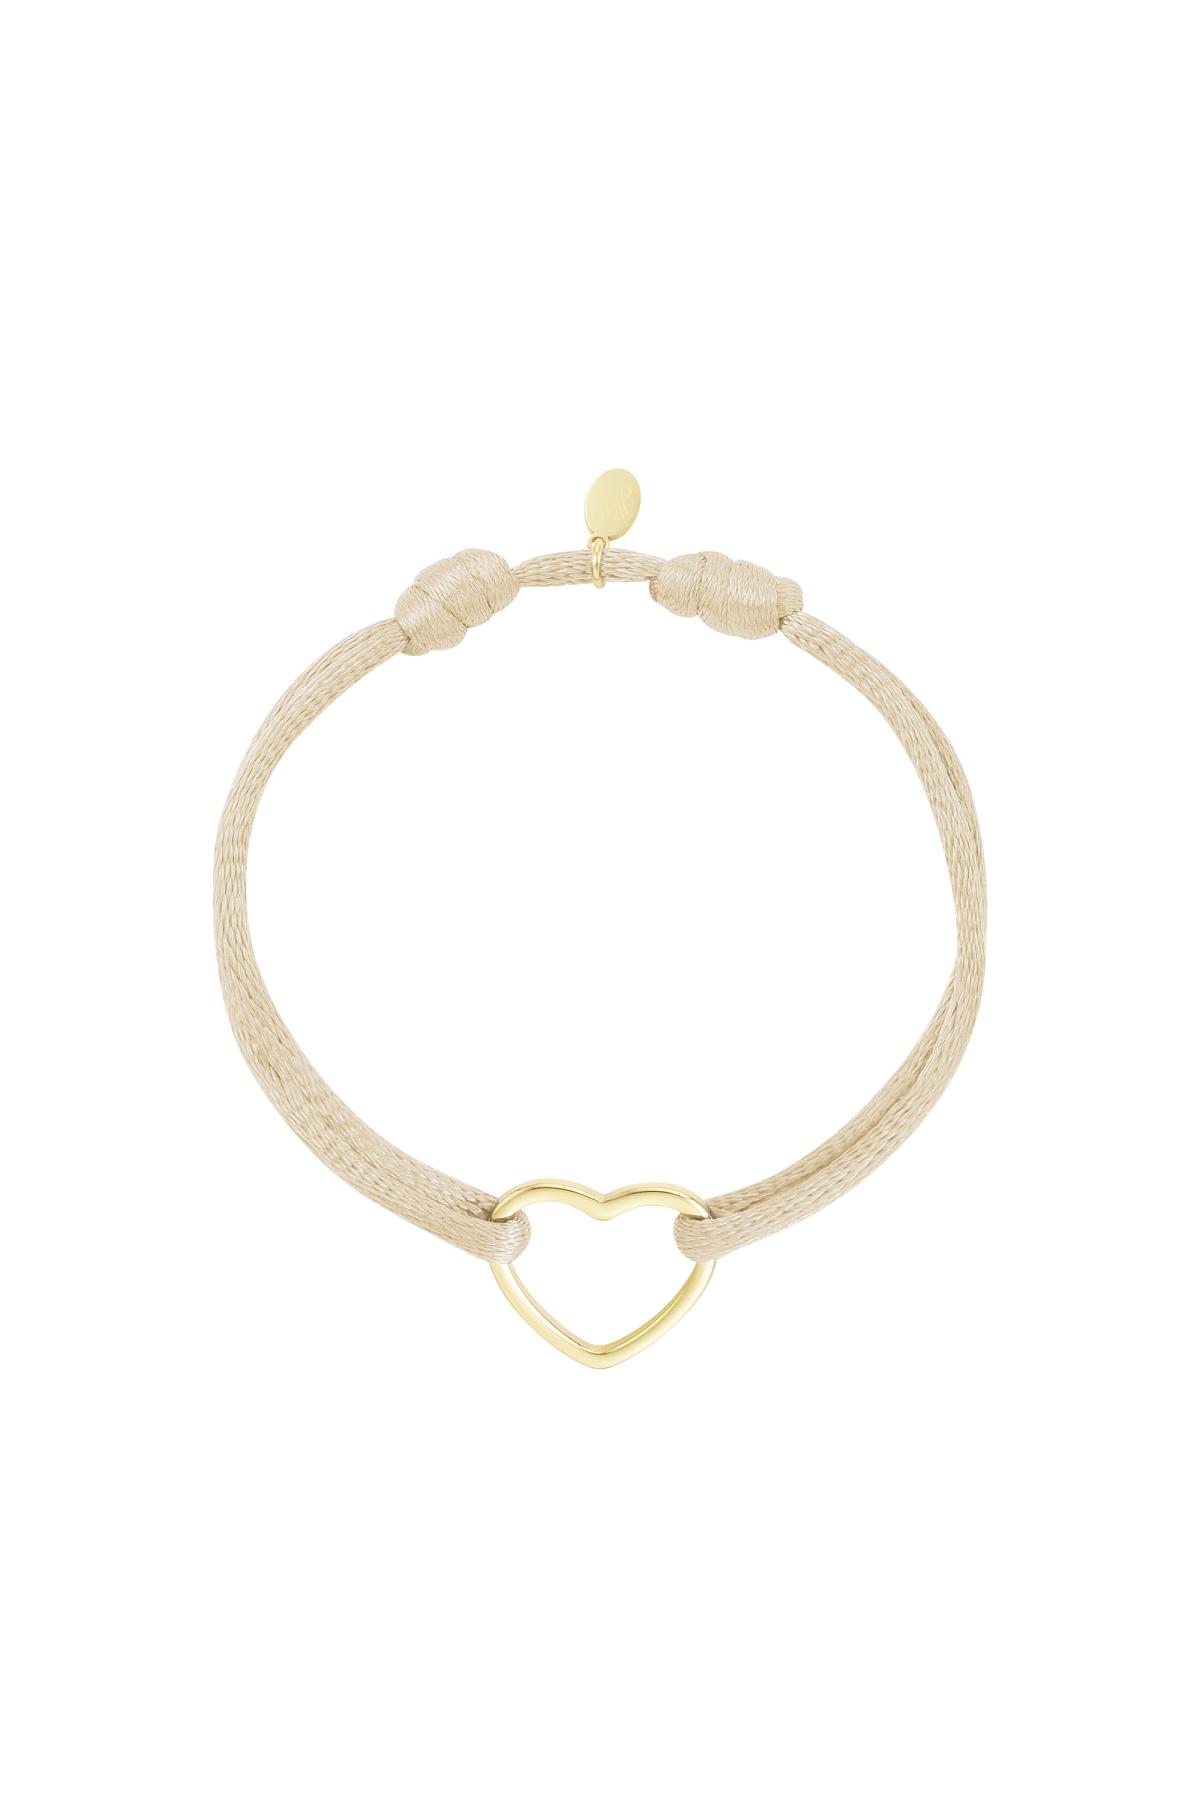 Fabric bracelet heart Champagne Stainless Steel h5 